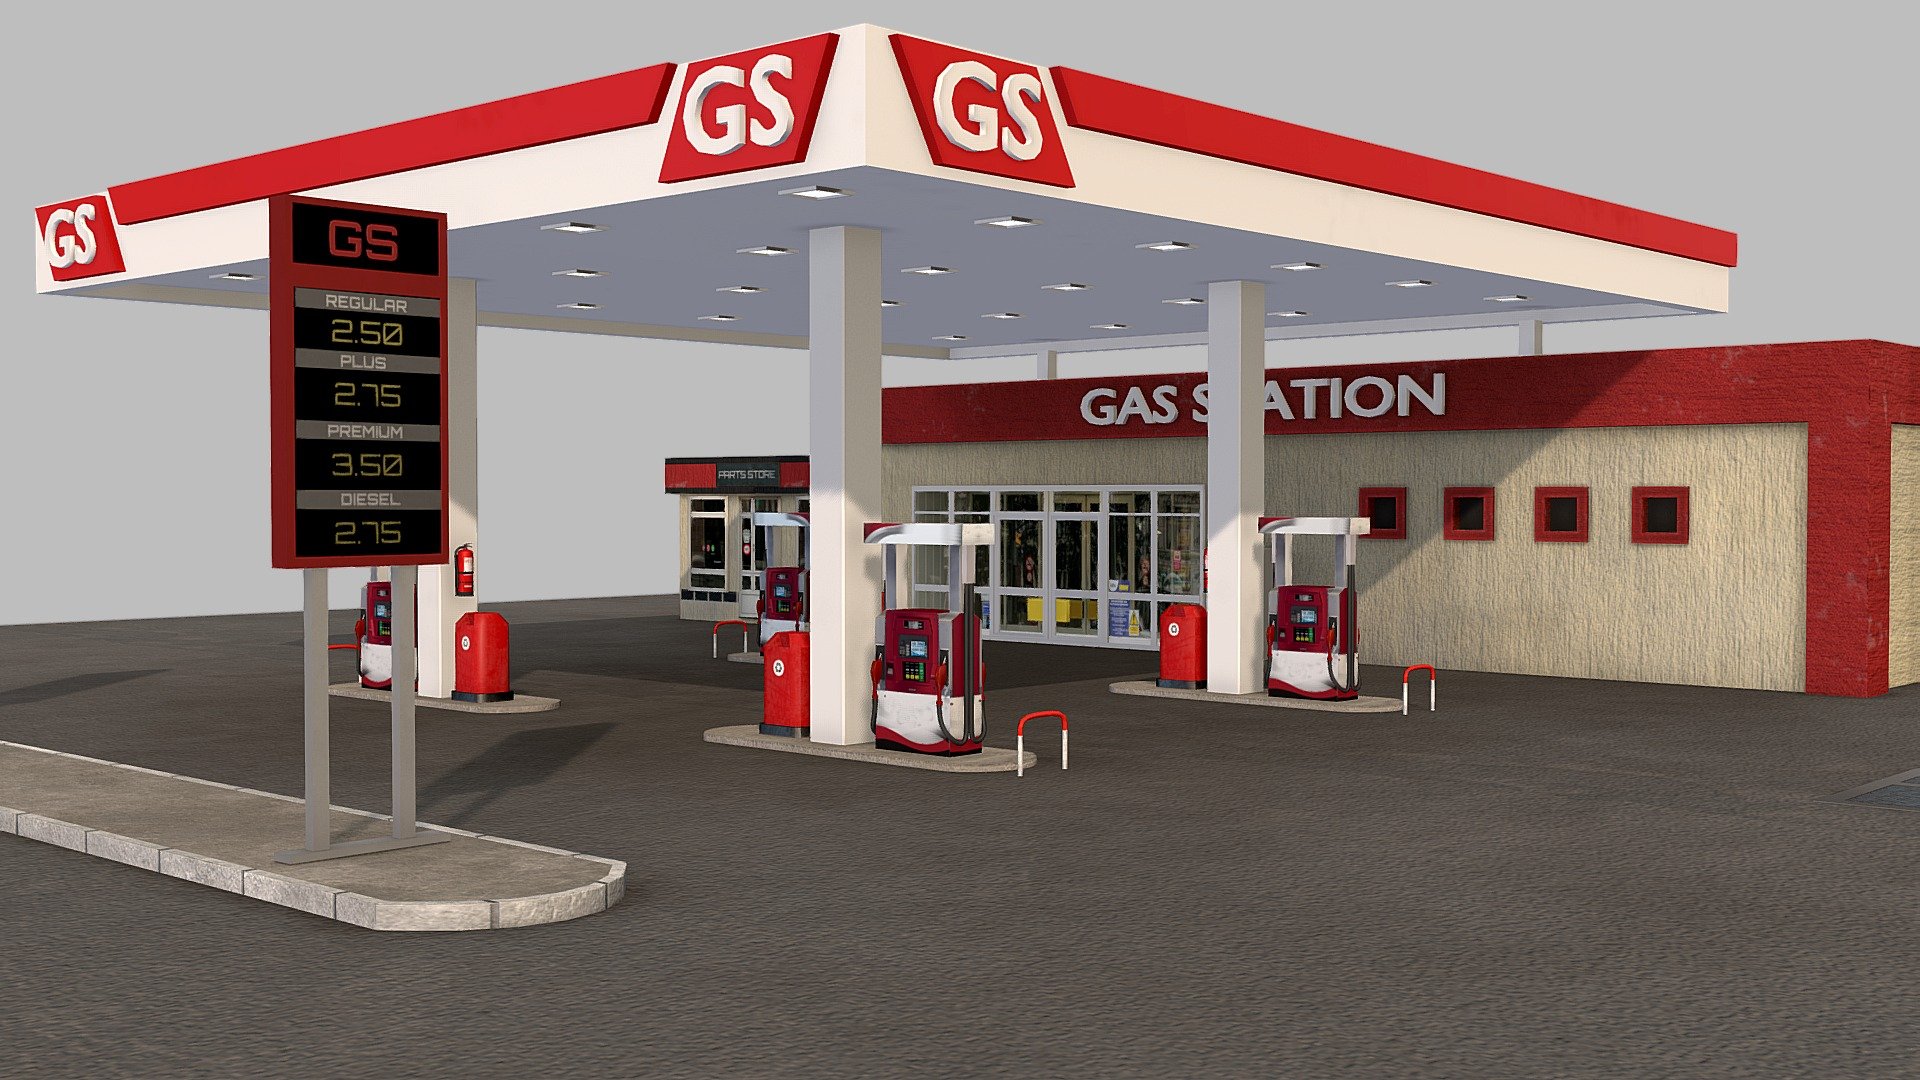 Features:




Low poly

Optmized

Game ready

Separated and nomed parts

Easy to modify

All formats tested and working

Textures included and materials applied.

Textures PBR MetalRoug and SpecGloss 2048x2048

Formats:




Blender (native)

FBX

OBJ

DAE

GLTF 2.0

Unity
 - Gas Station - Buy Royalty Free 3D model by Elvair Lima (@elvair) 3d model